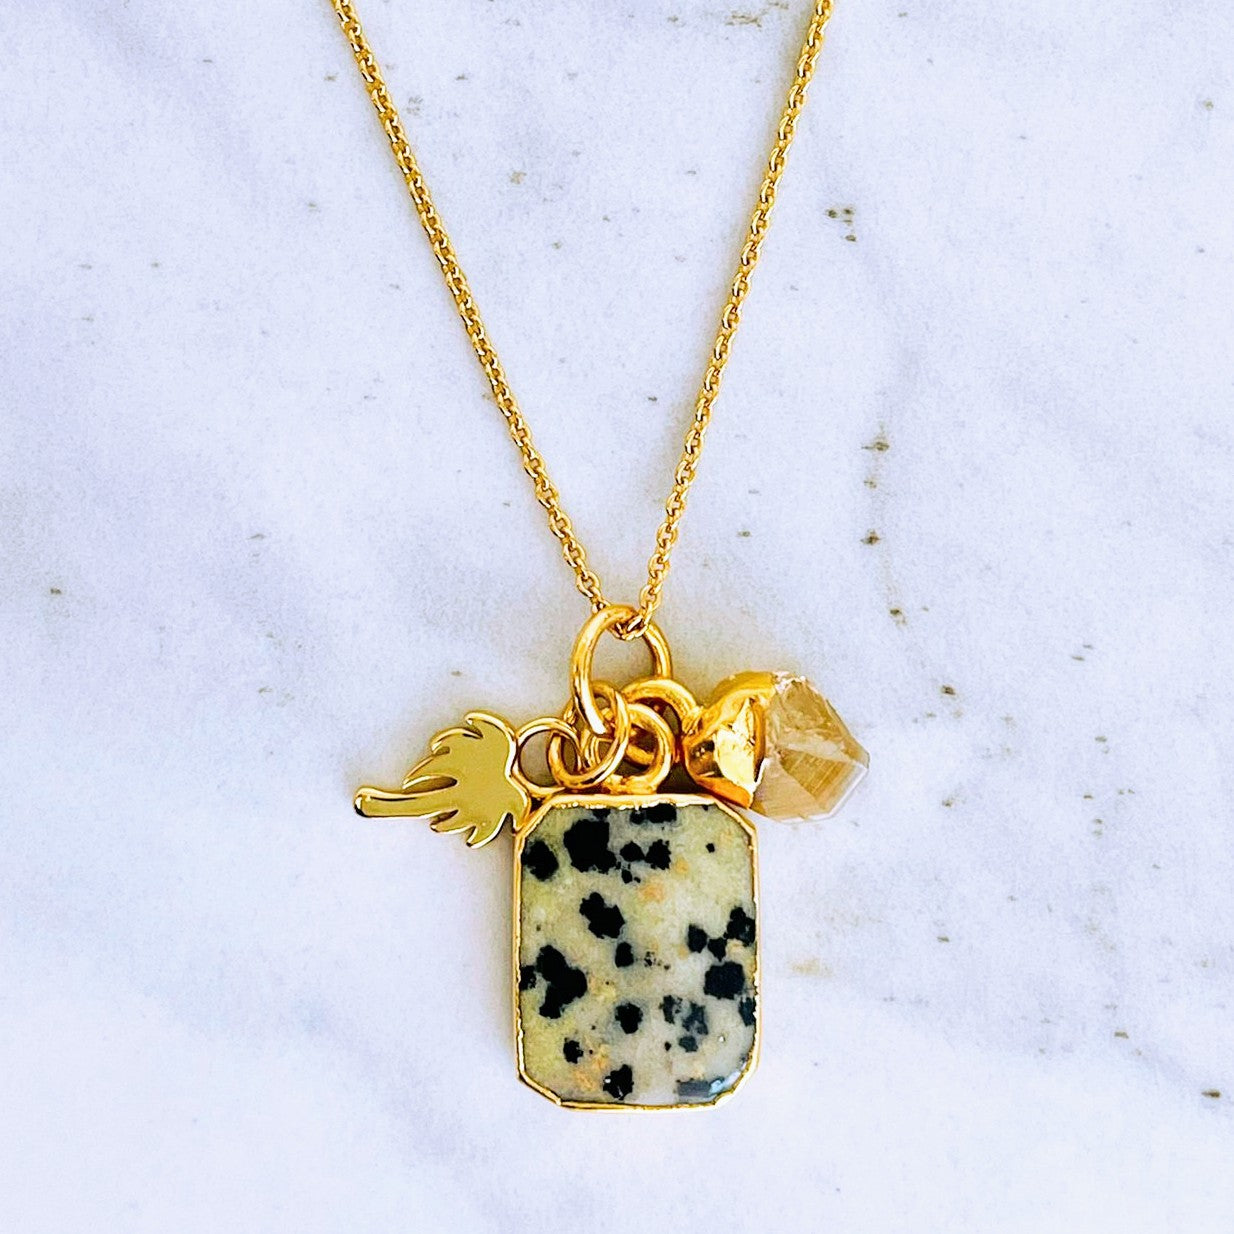 Gold plated dalmatian jasper, citrine and palm tree charm pendant necklace